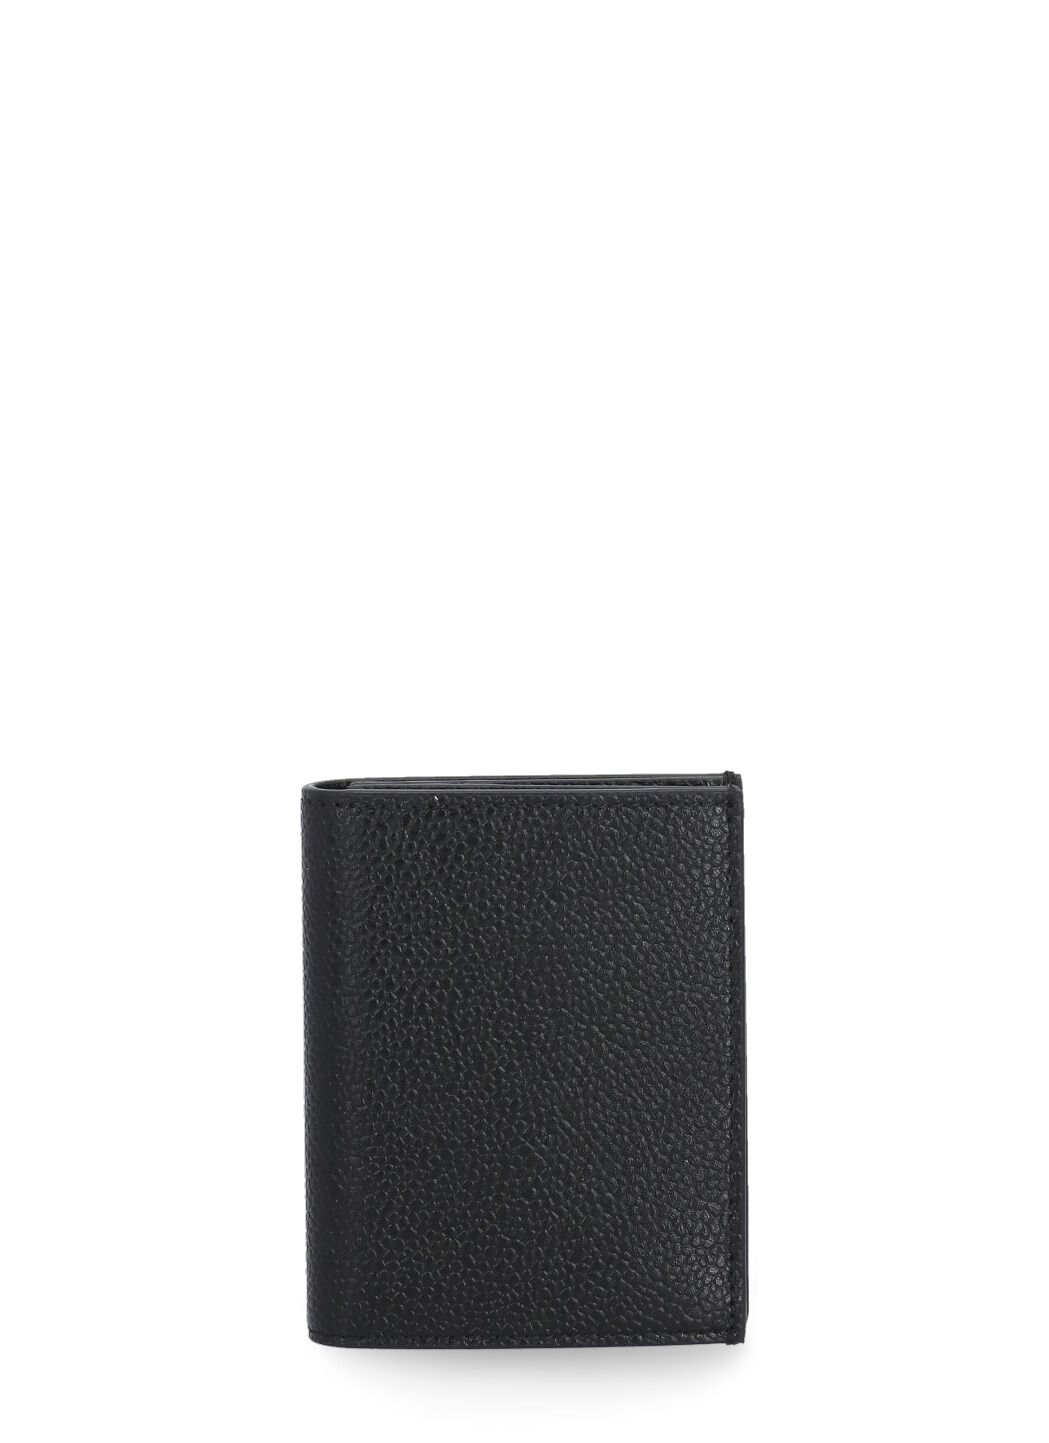 Pebble leather card holder